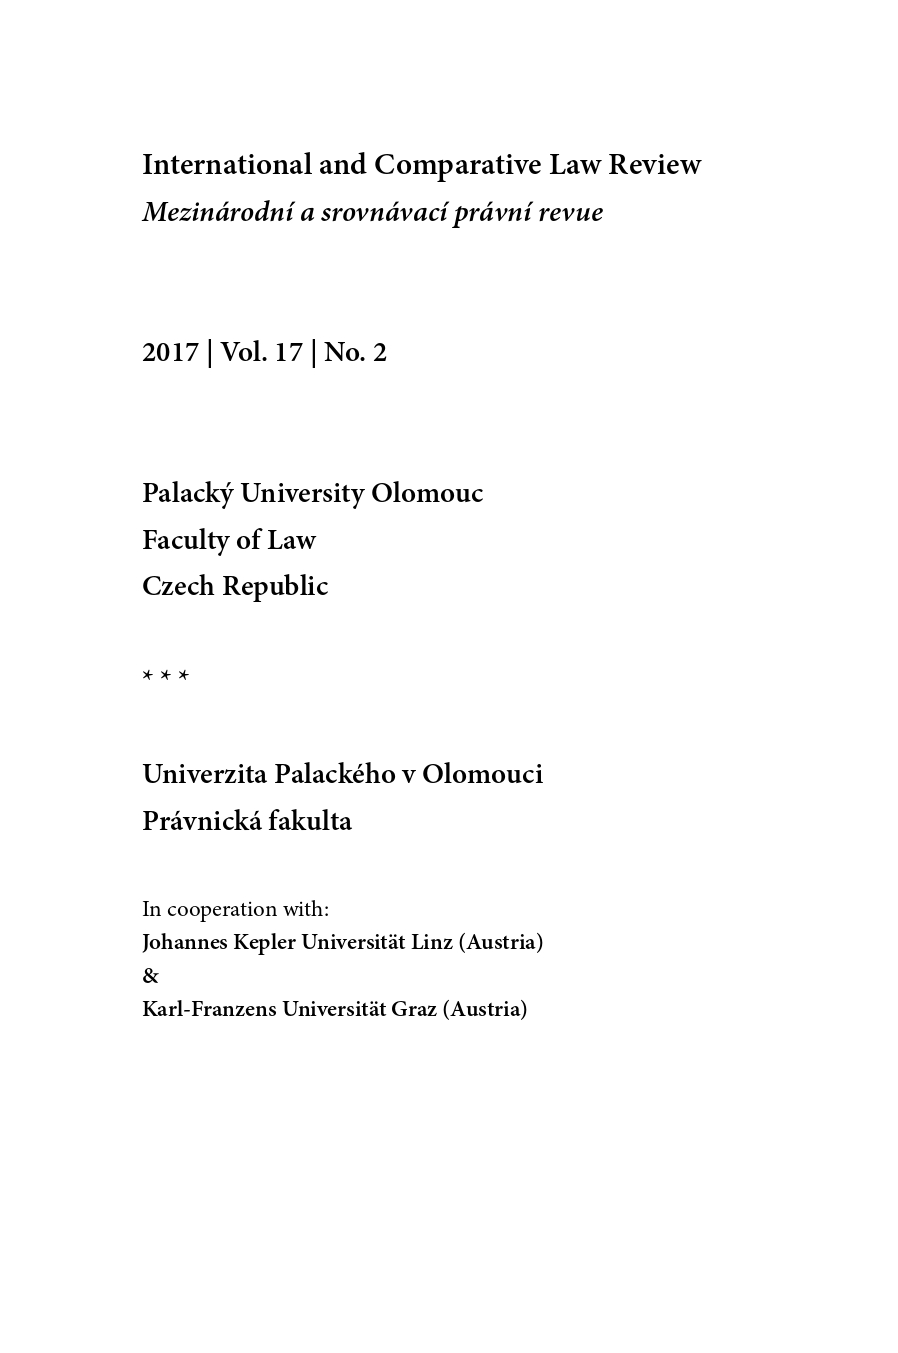 Multidimensional and Equivocal: the Theoretical and Philosophical Issues of Legal Sanctions